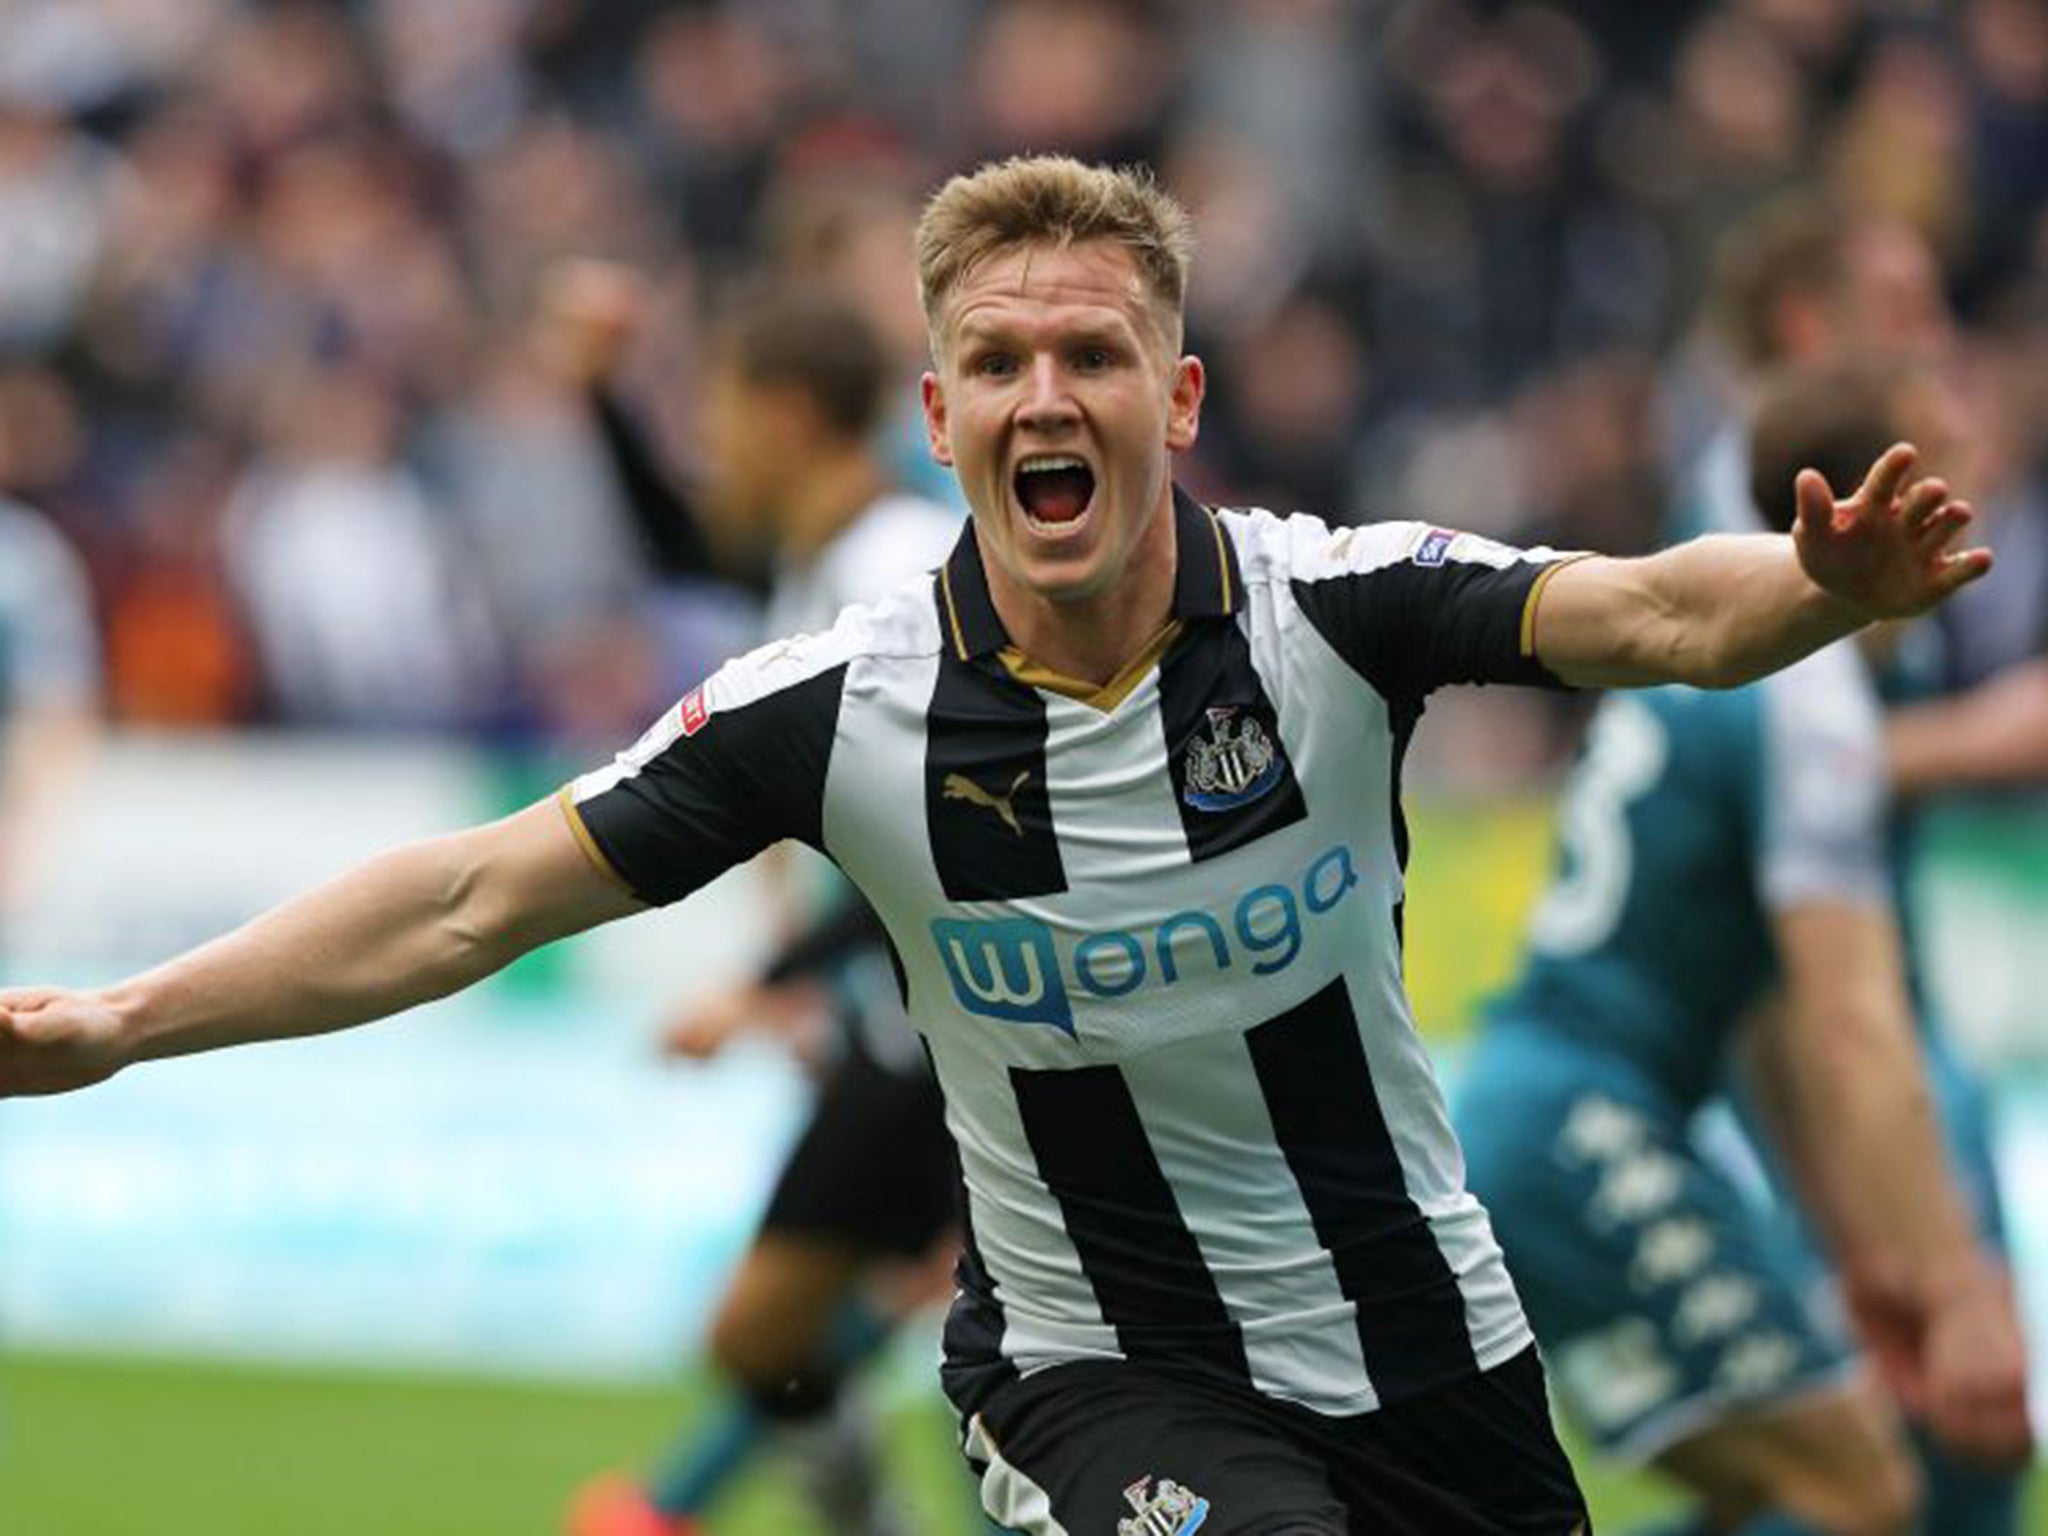 Ritchie restored Newcastle's lead to edge Benitez's side closer to promotion